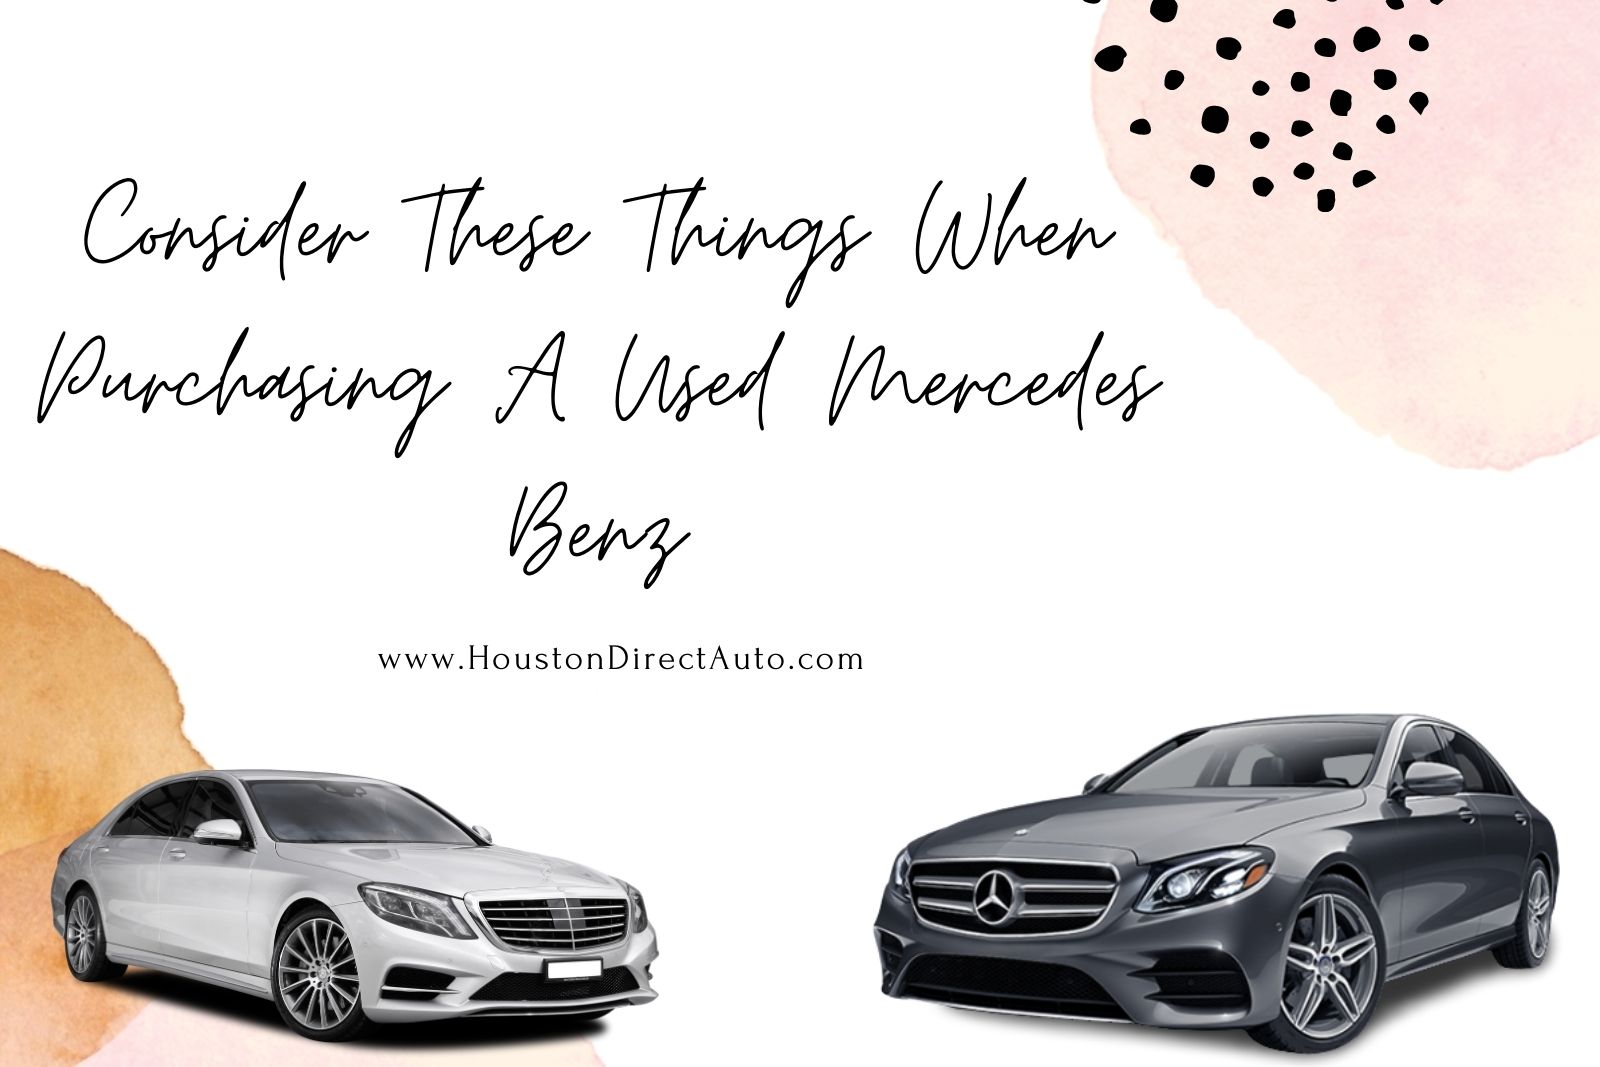 Consider These Things When Purchasing A Used Mercedes Benz